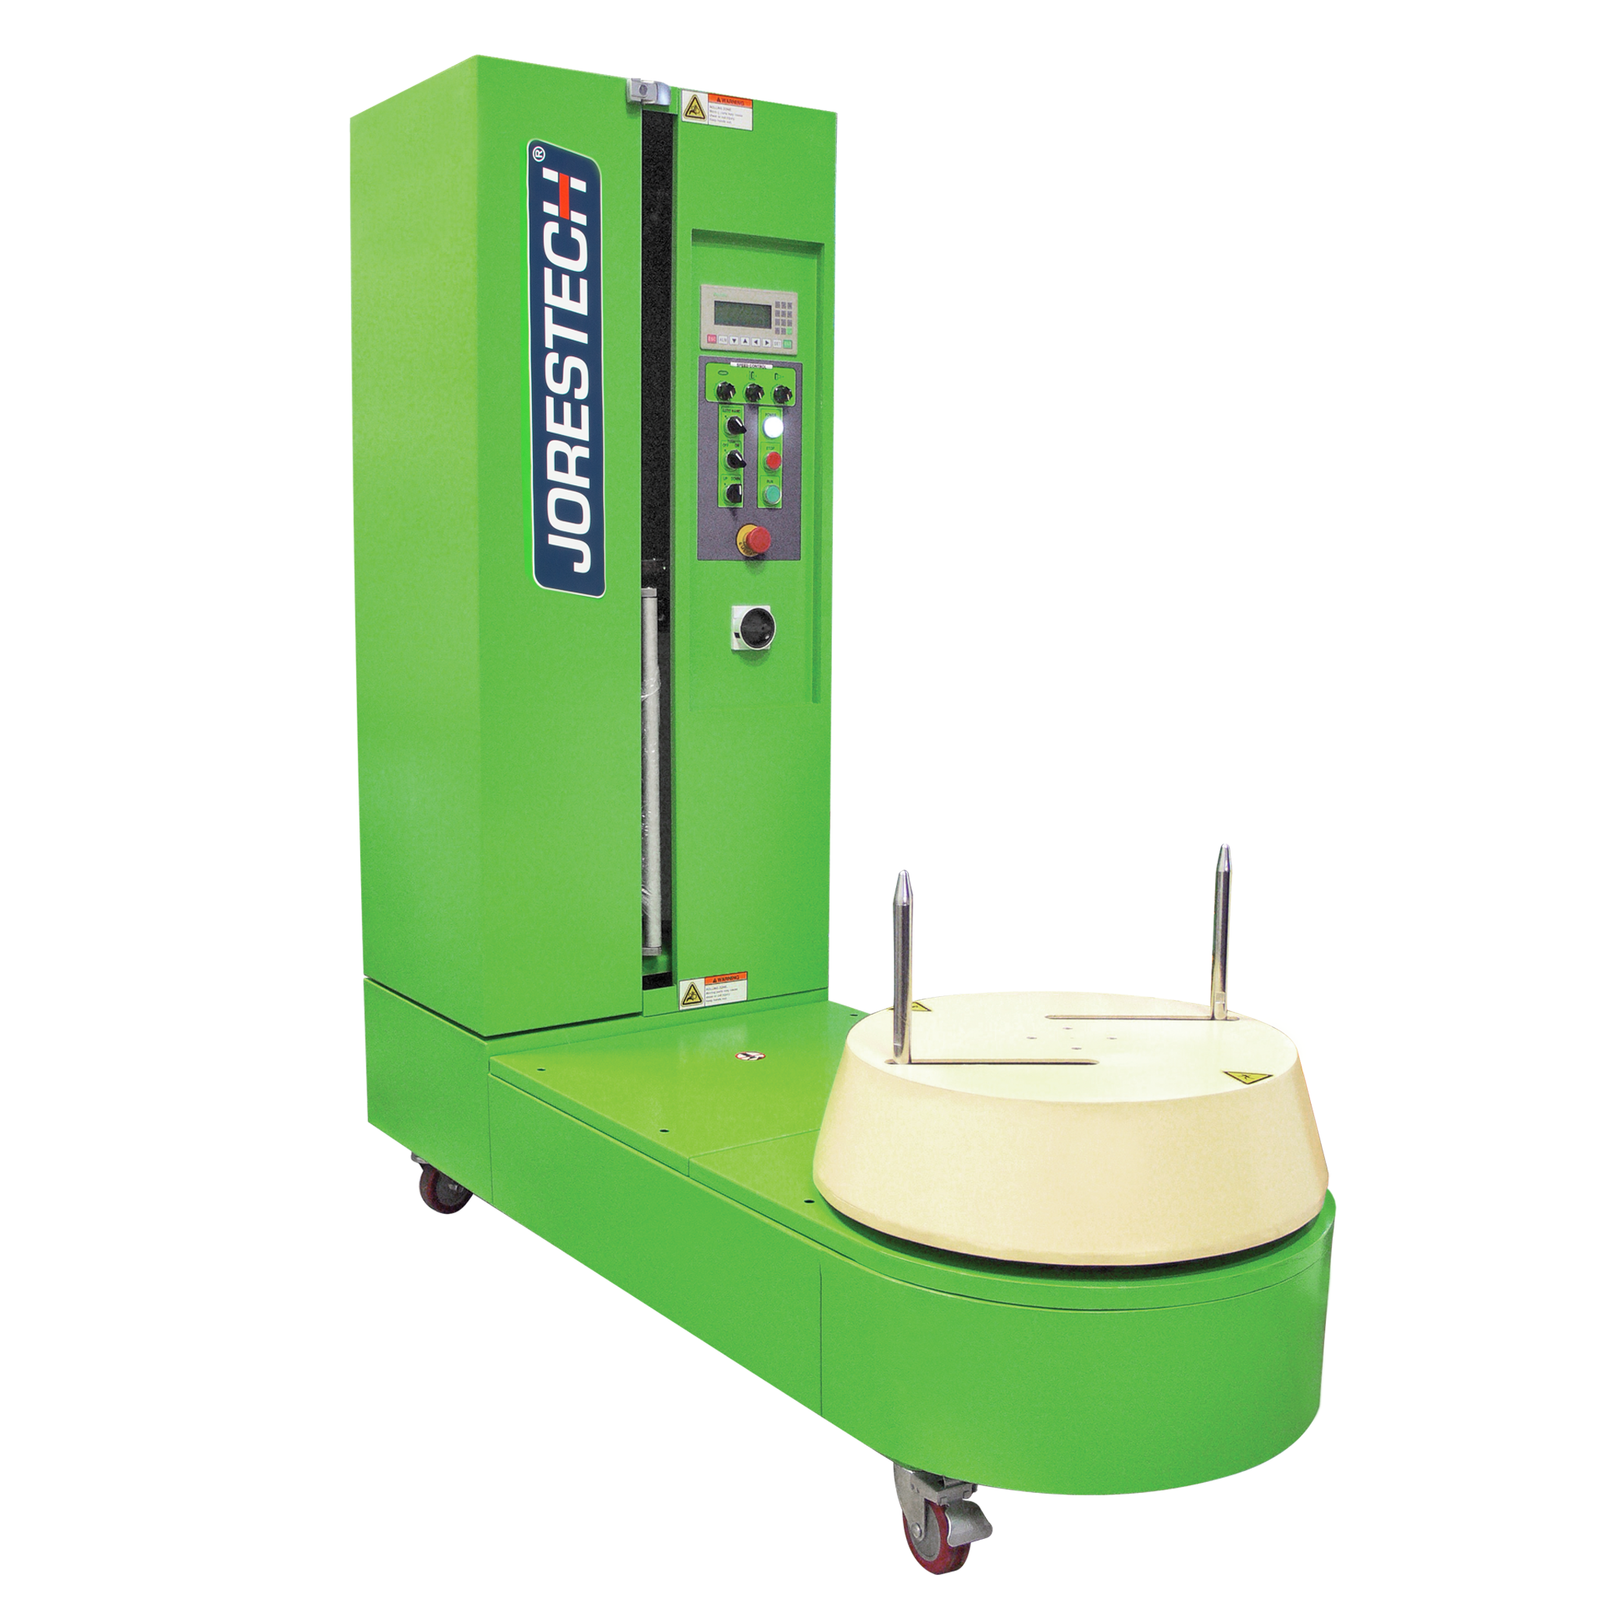 Green stretch Wrapping machine for suitcases over a white background